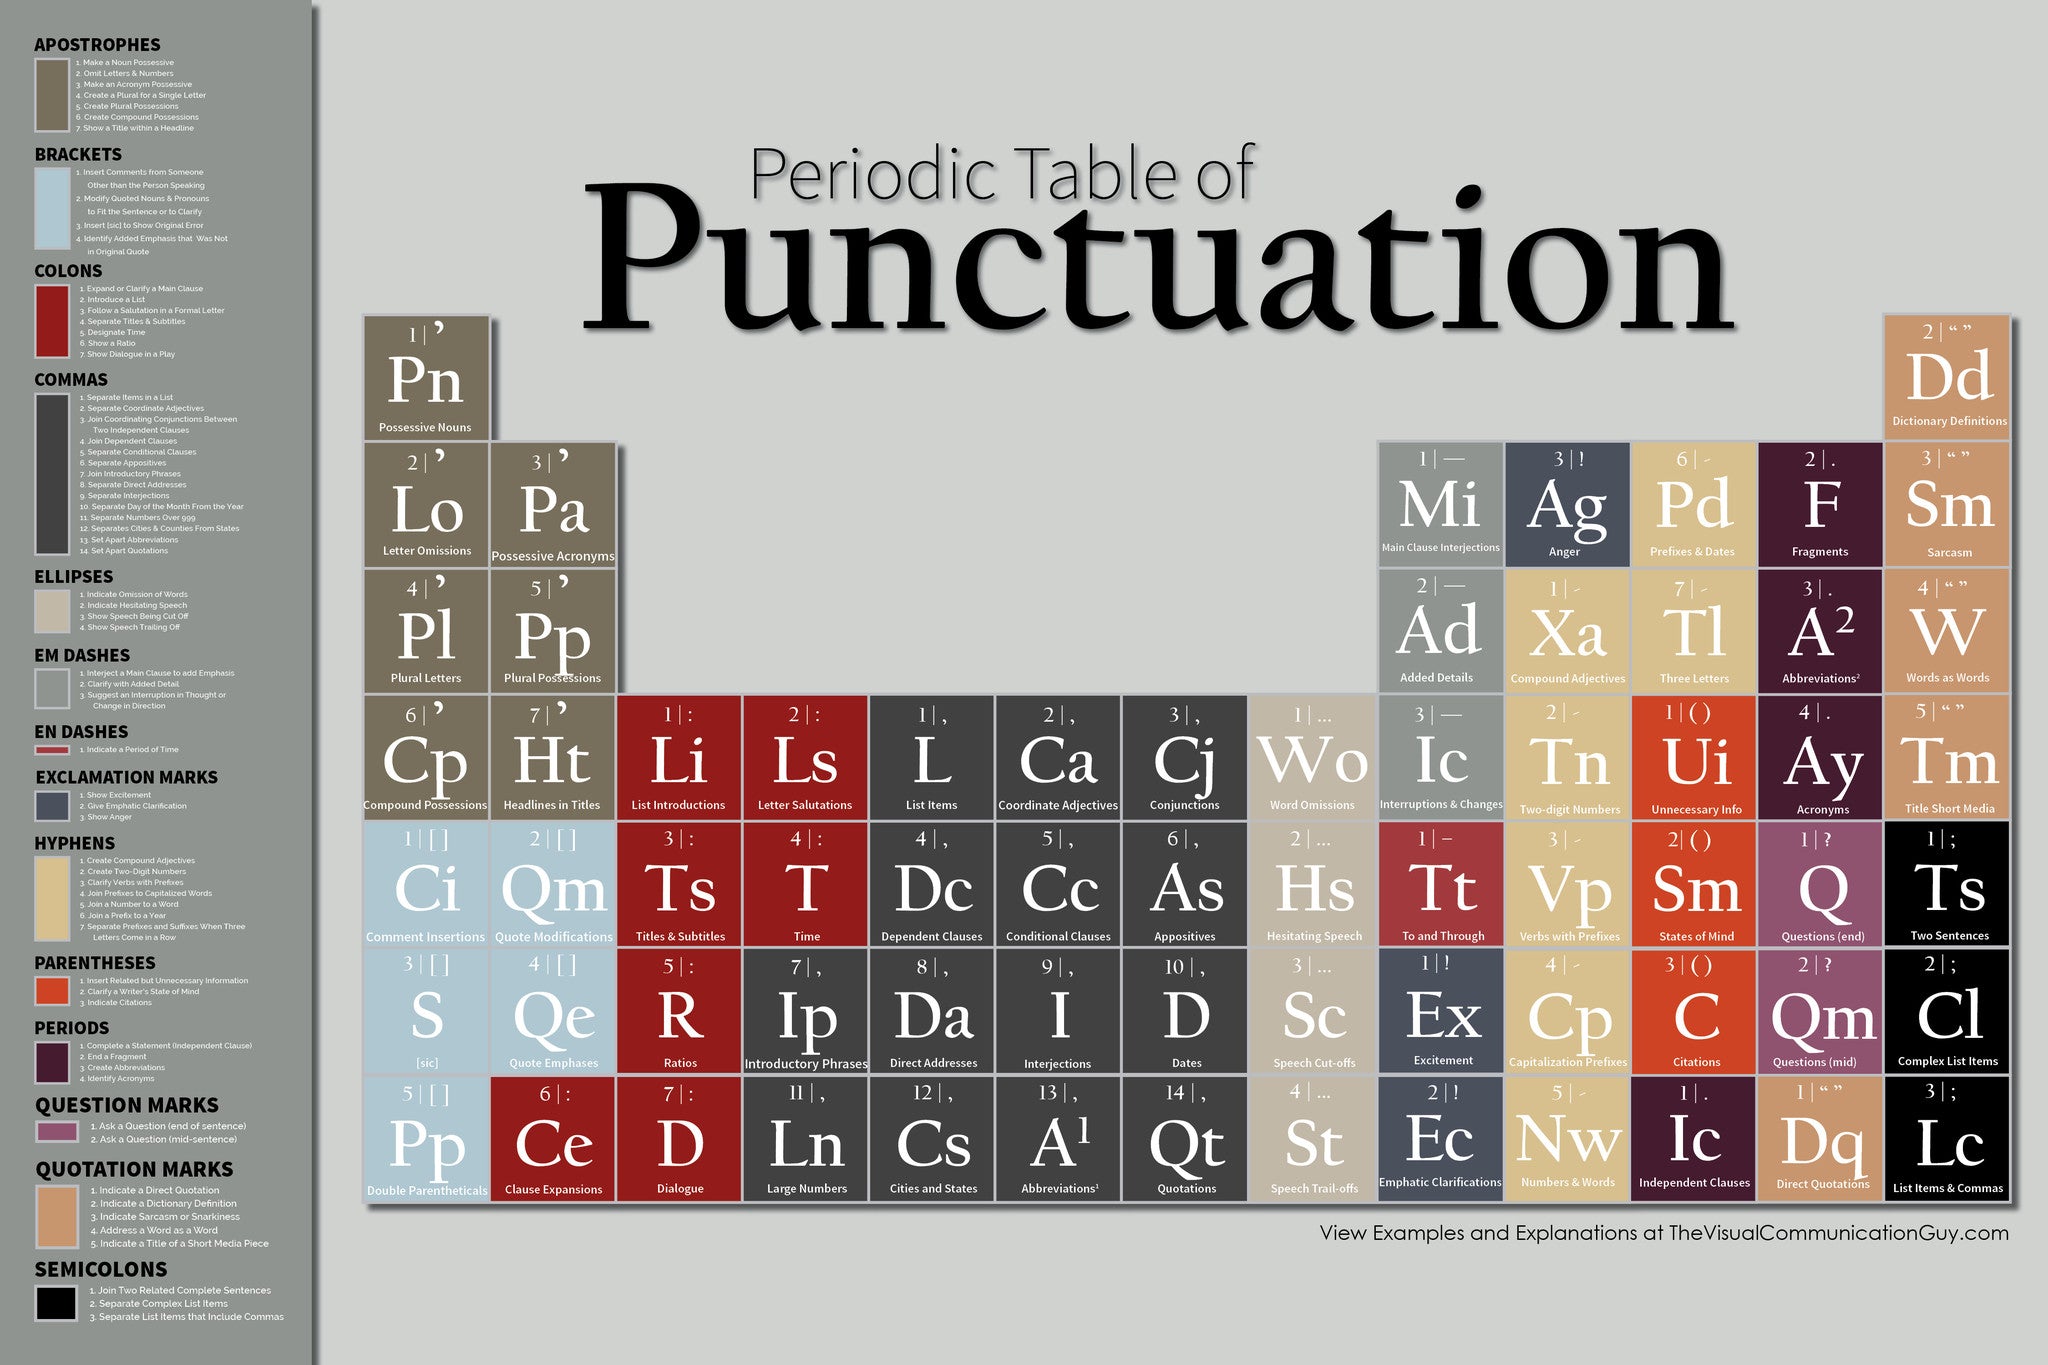 Periodic Table of Punctuation 19x28.5 Poster Print